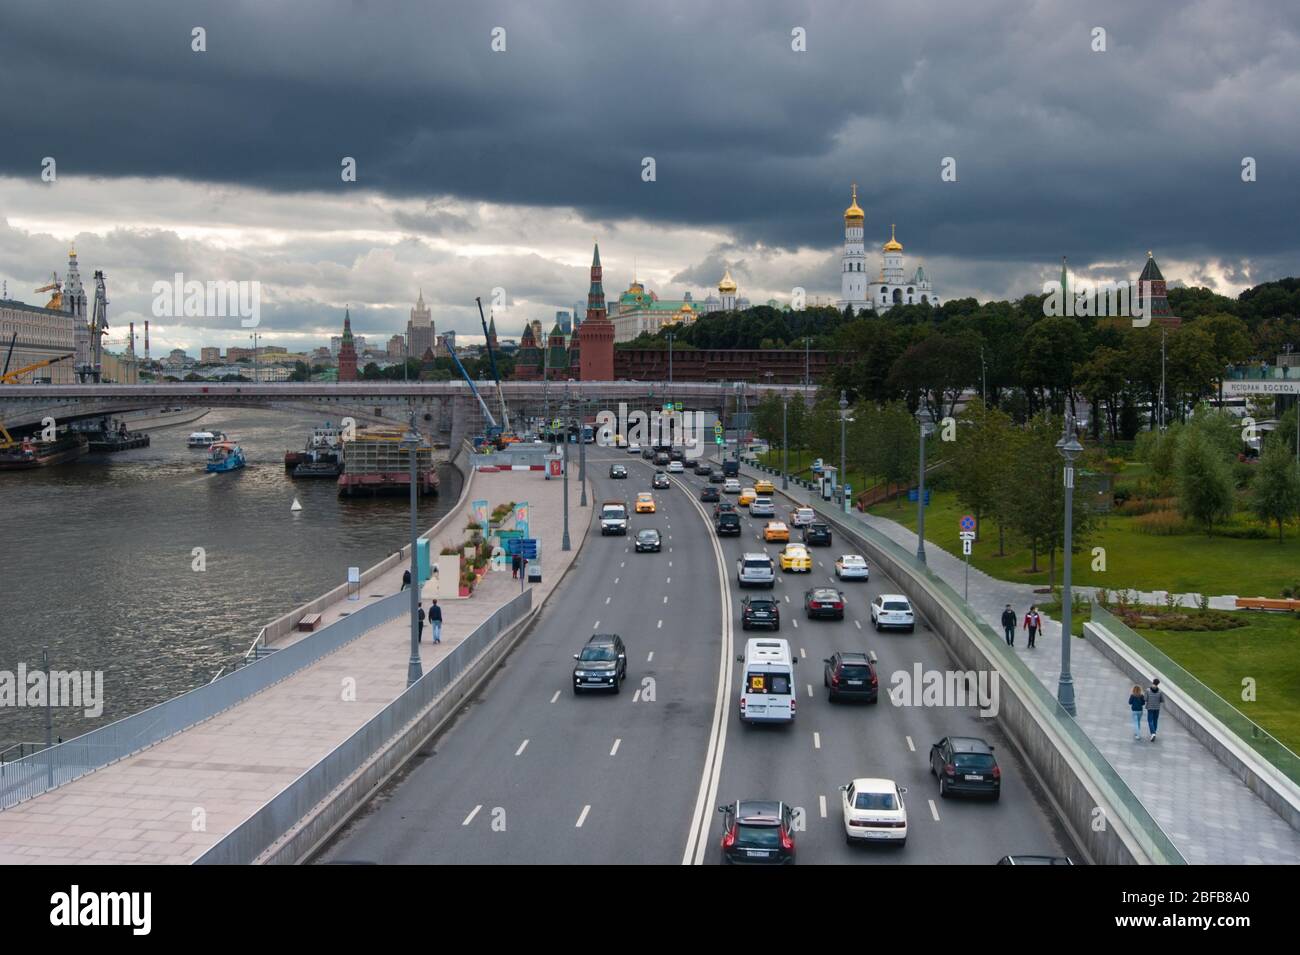 Moscow, Russia - August 2019. Moscow traffic. In the photo, a lot of cars - mainly passenger passenger taxis - rush along the three-lane road to the v Stock Photo